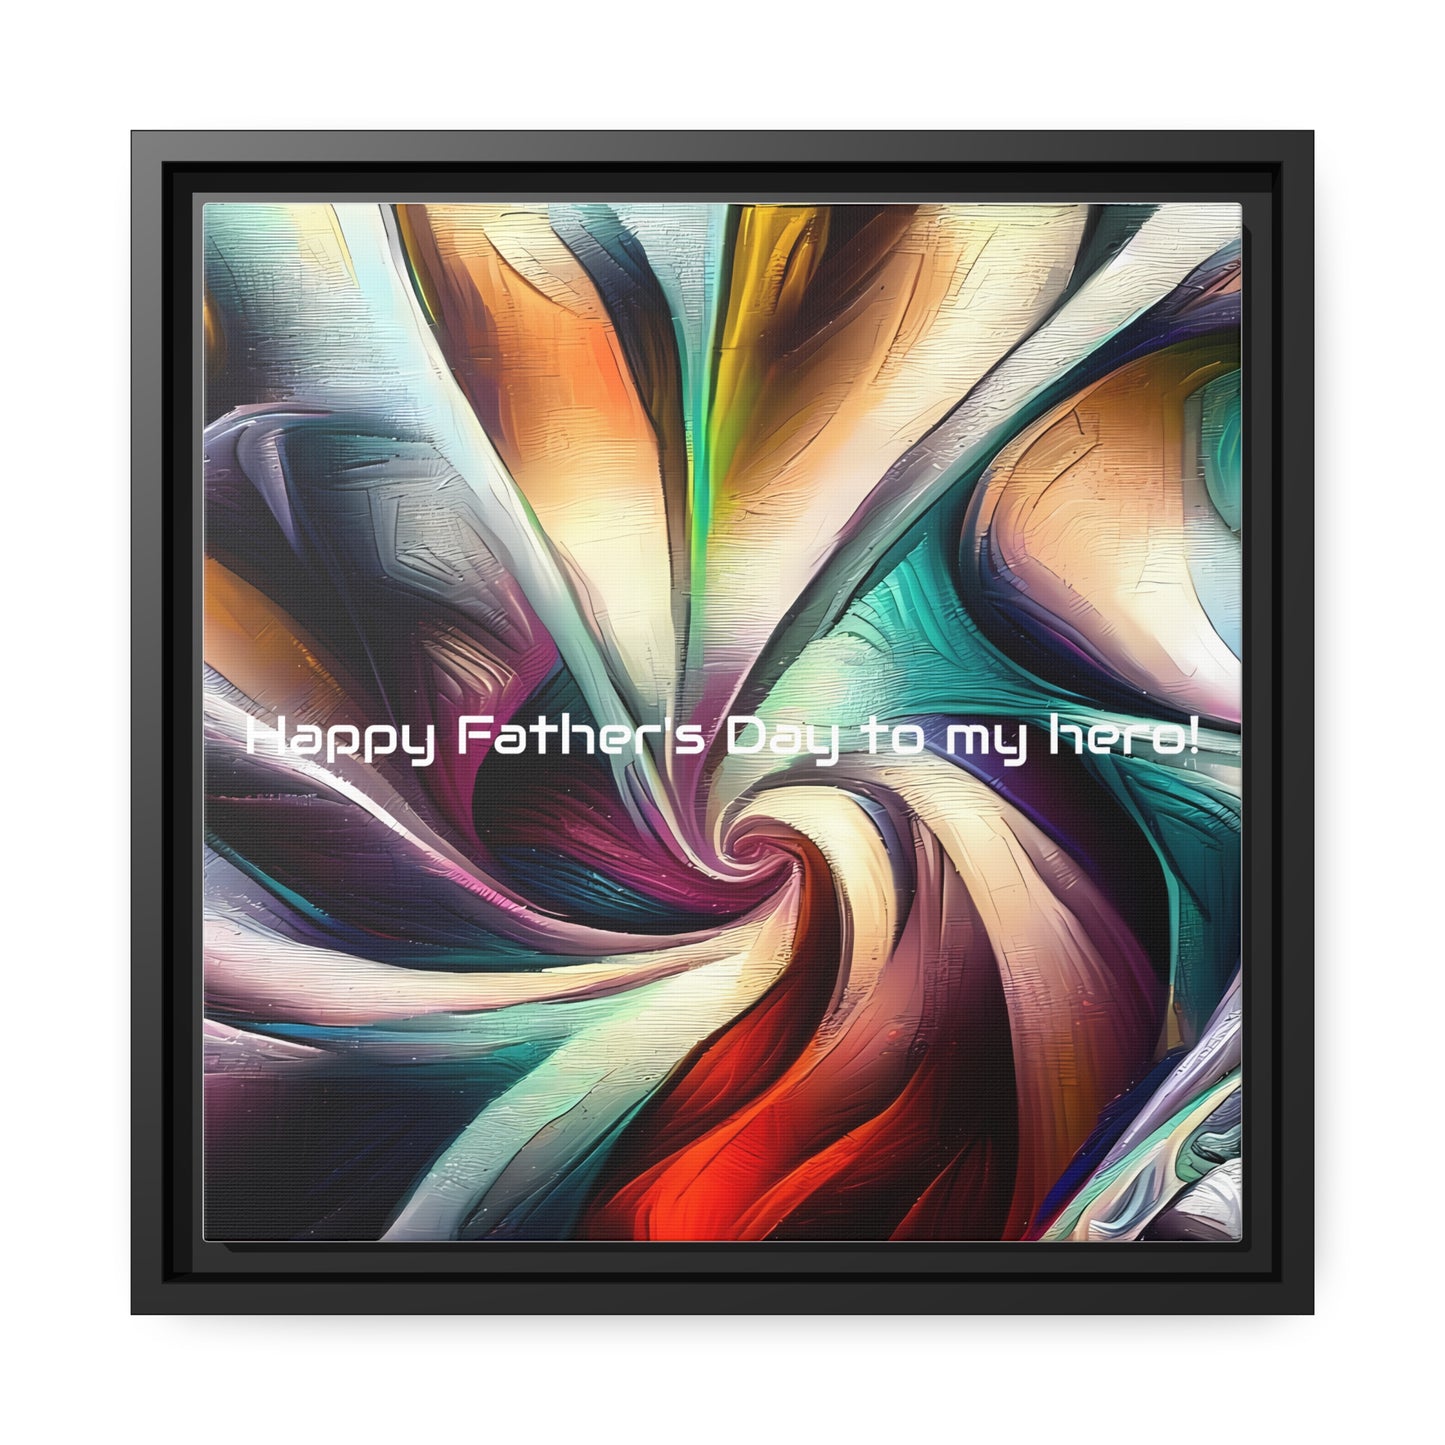 Awesome Matte Wall Art Canvas Decor Black Frame - Happy Father's Day to my hero! -  Canvas Art Fathers Day Gift Item